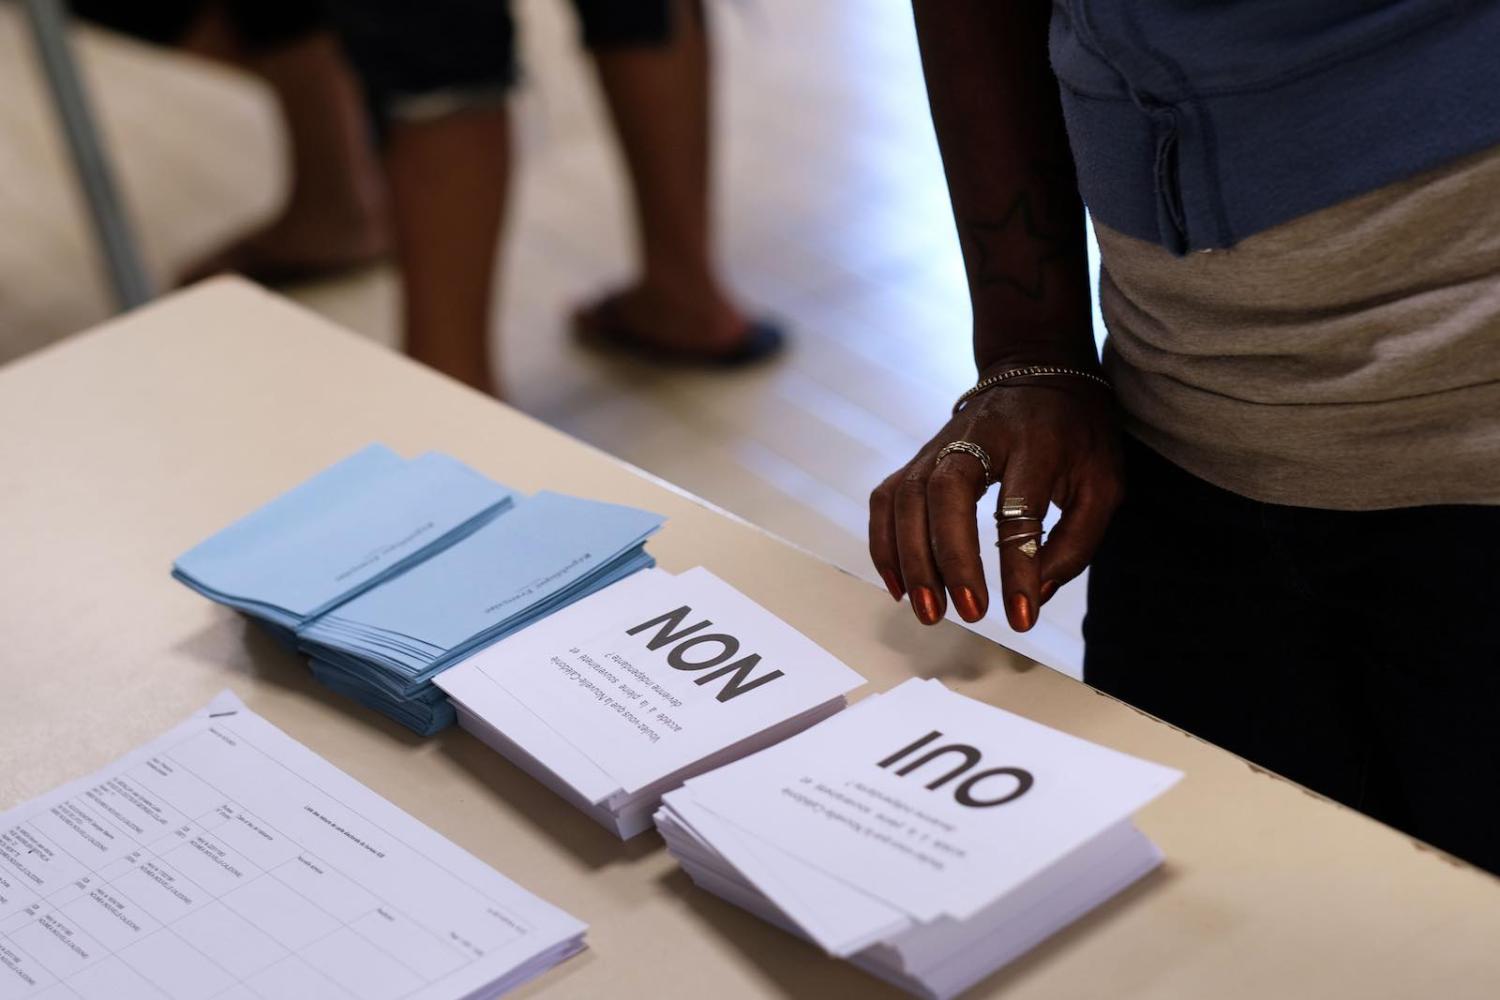 Ballot papers in the 2018 referendum on New Caledonia's independence from France – with another vote now anticipated for 2020 (Photo: Theo Rouby/AFP/Getty Images)